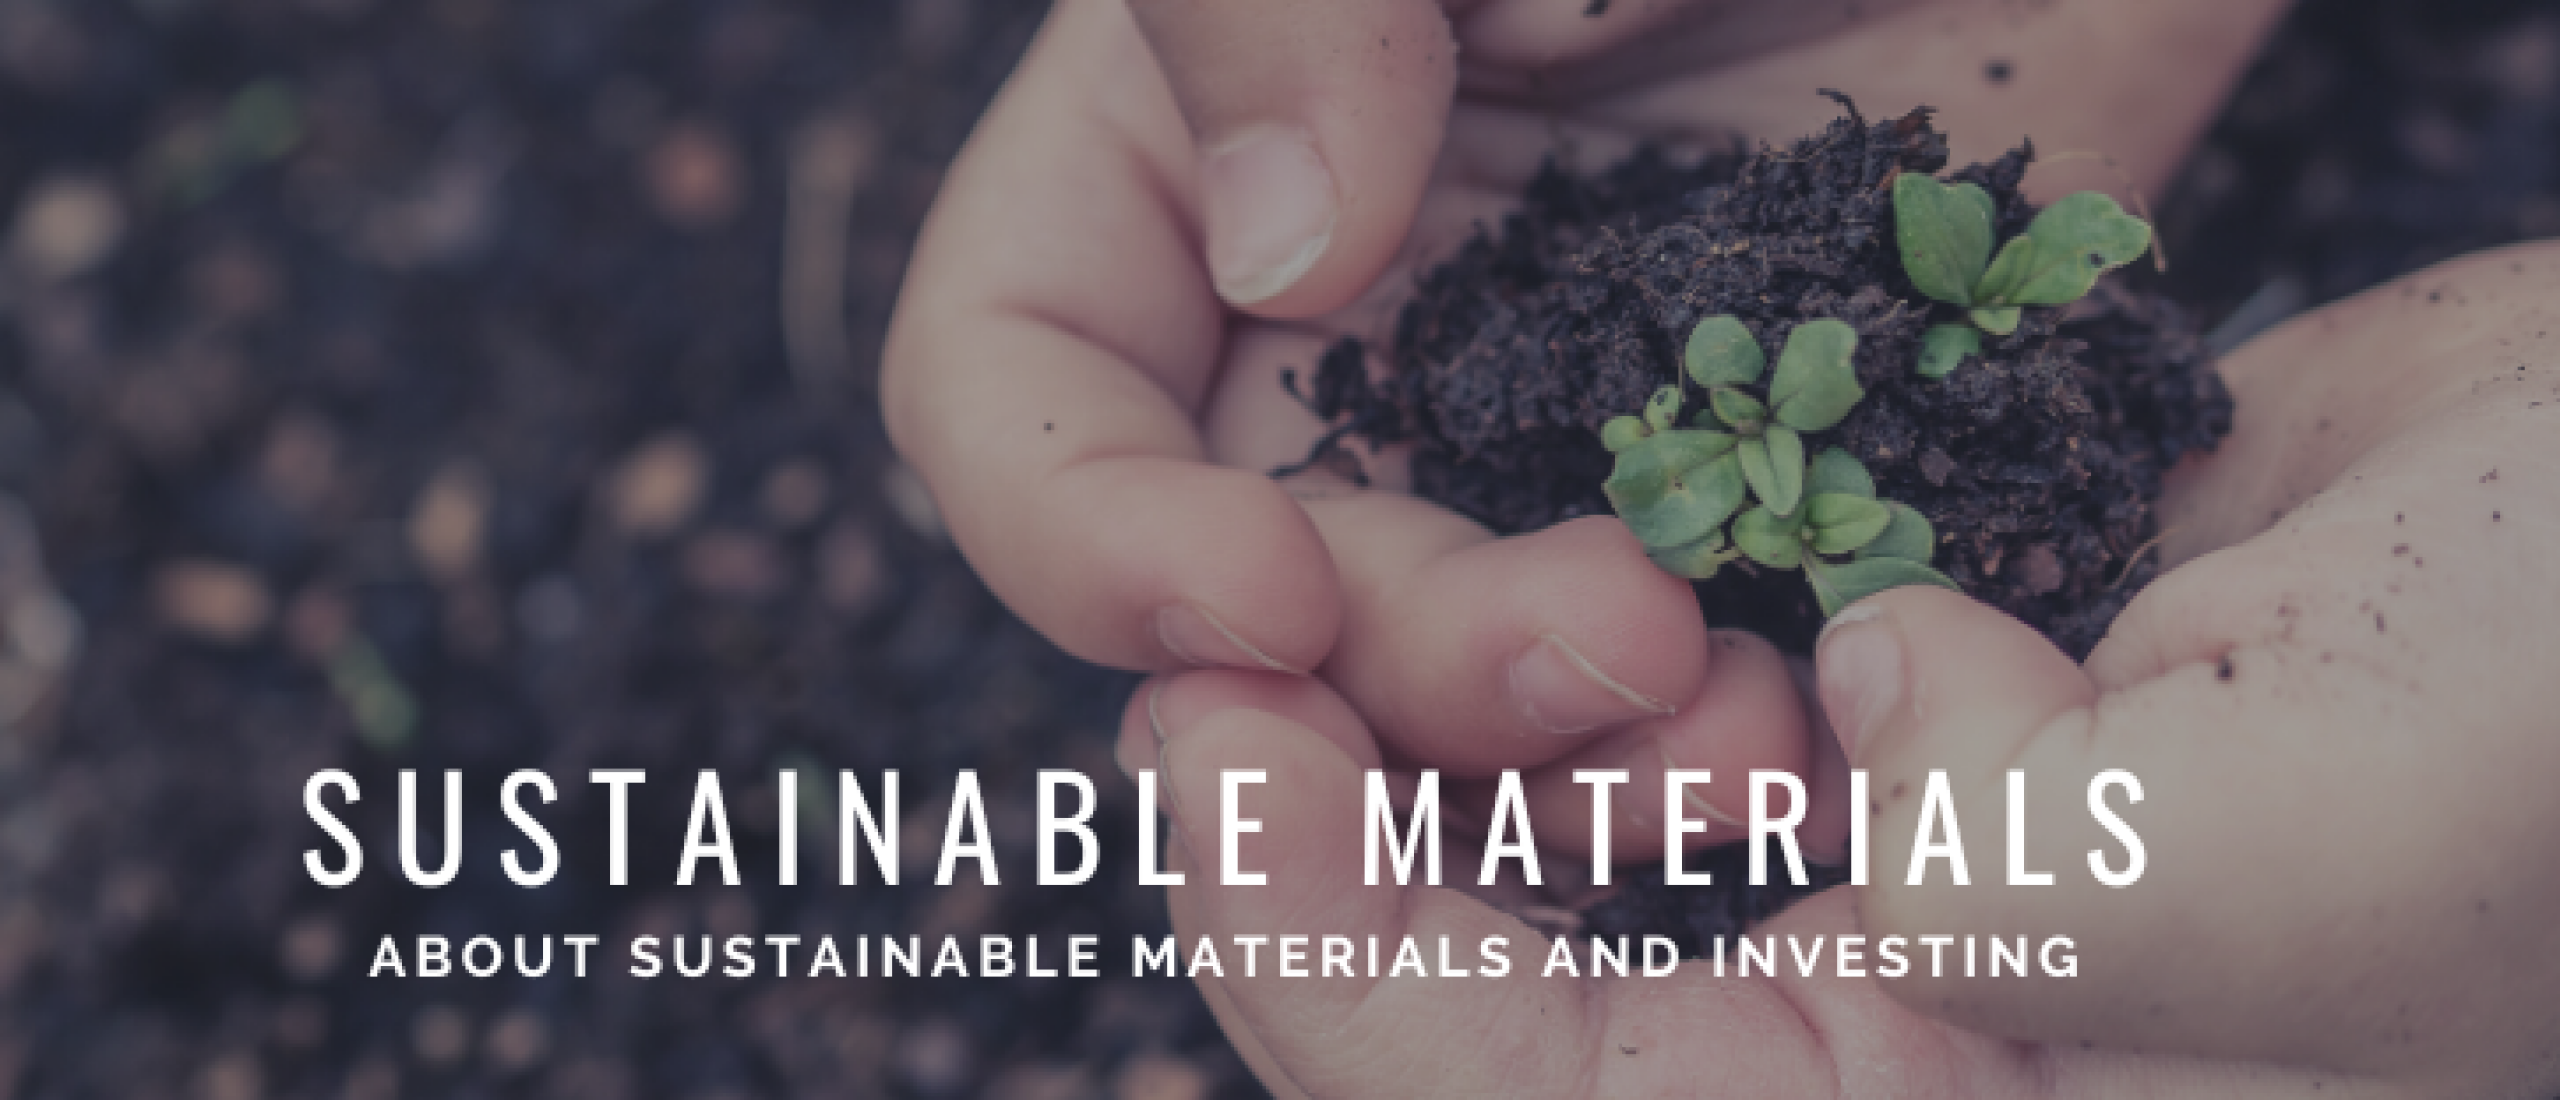 Sustainable Materials: Building, Products, Investing & More